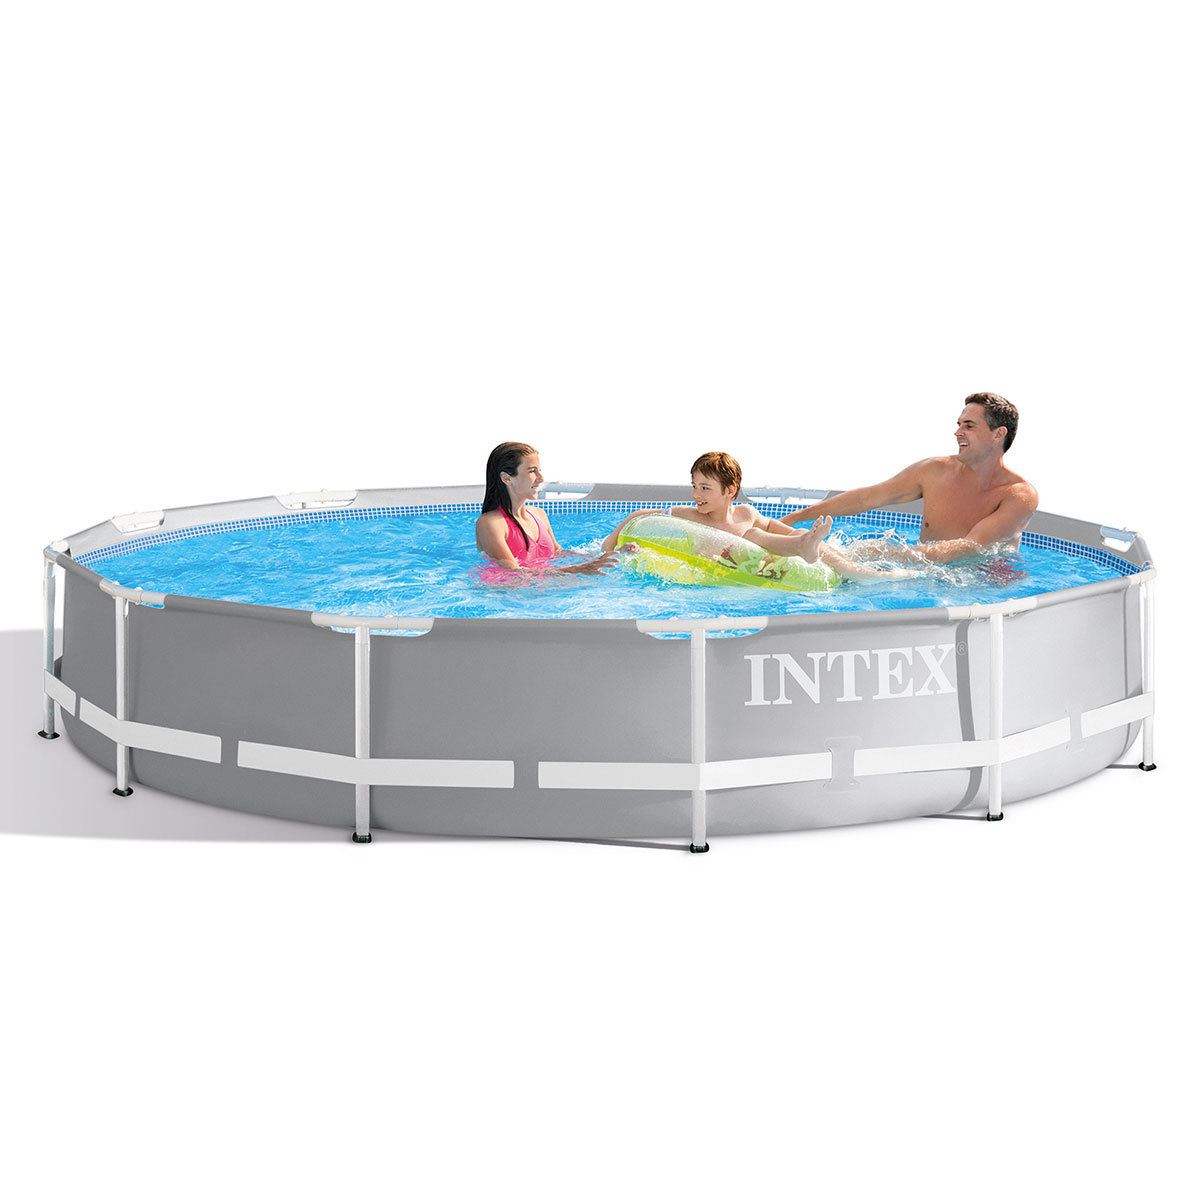 Intex 12ft (3.7m) Round Prism Frame Pool with Filter Pump